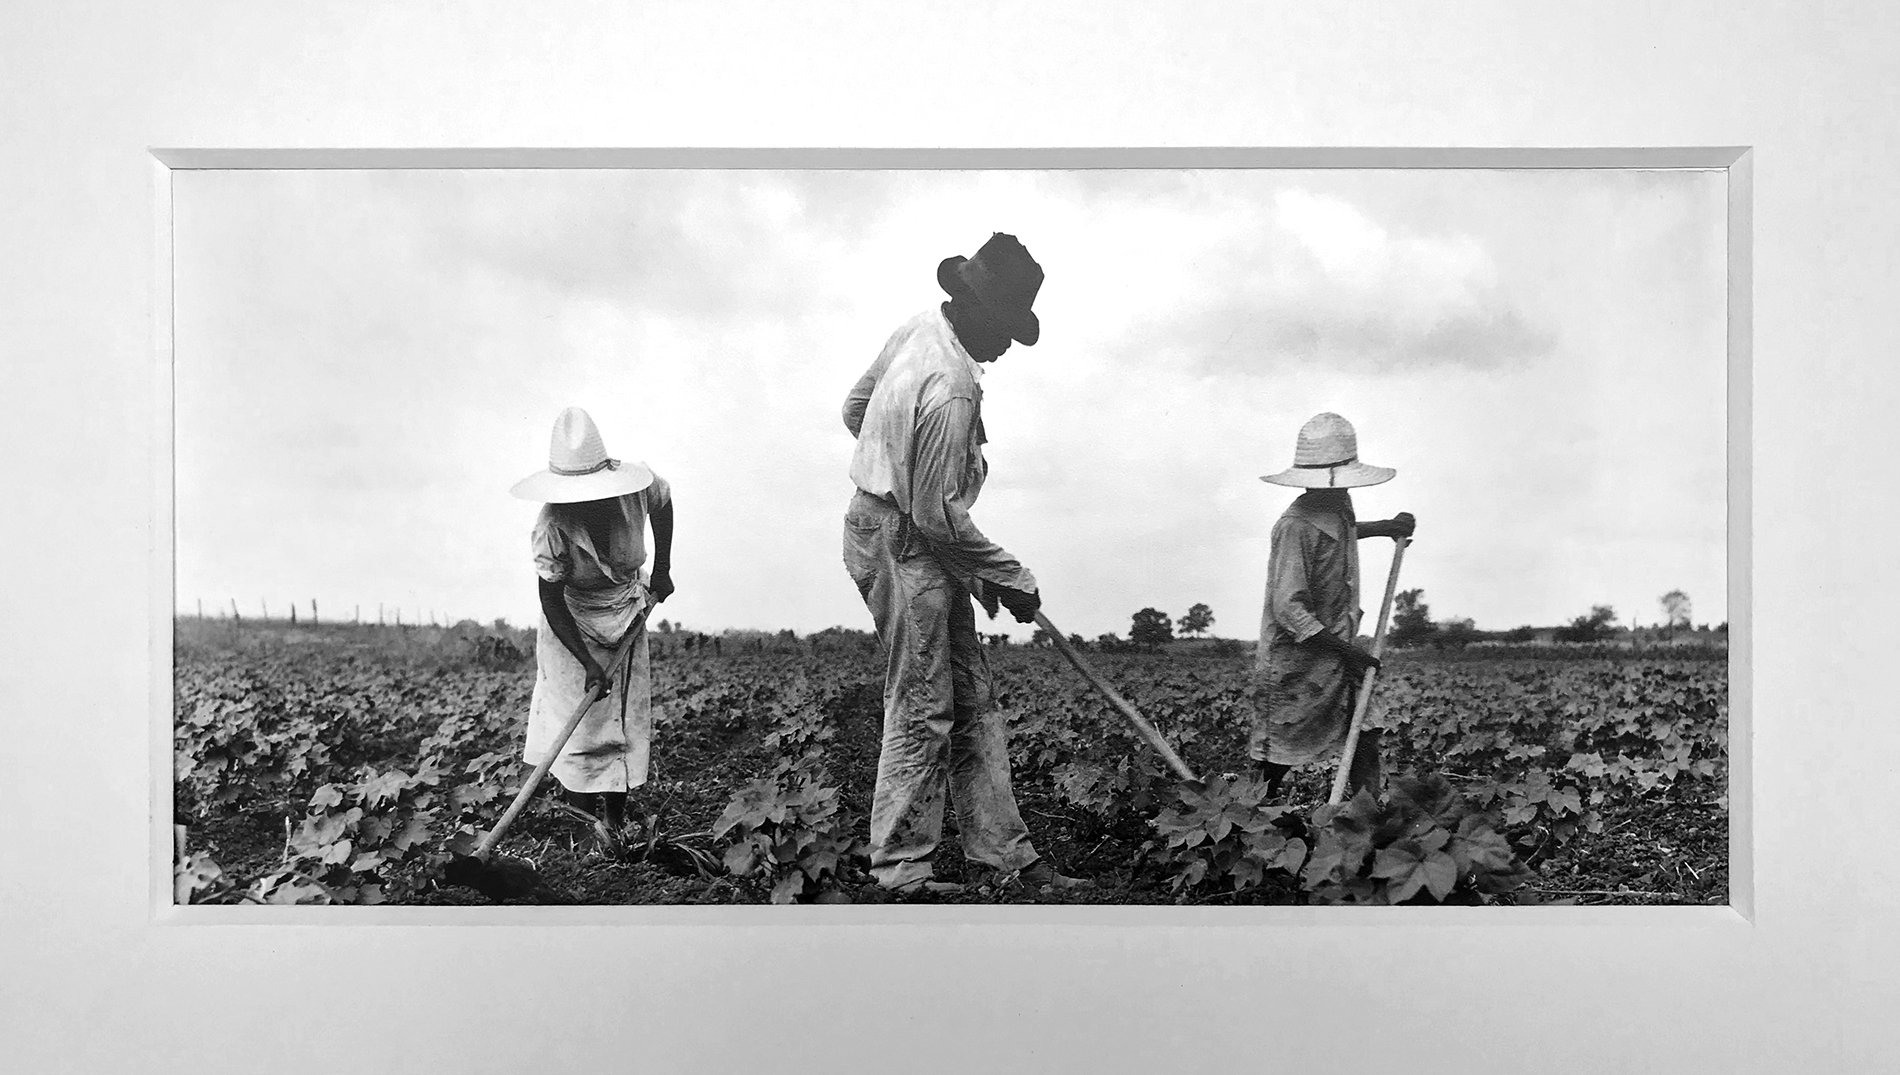 "Fieldworkers" - Dorothea Lange | from private collection